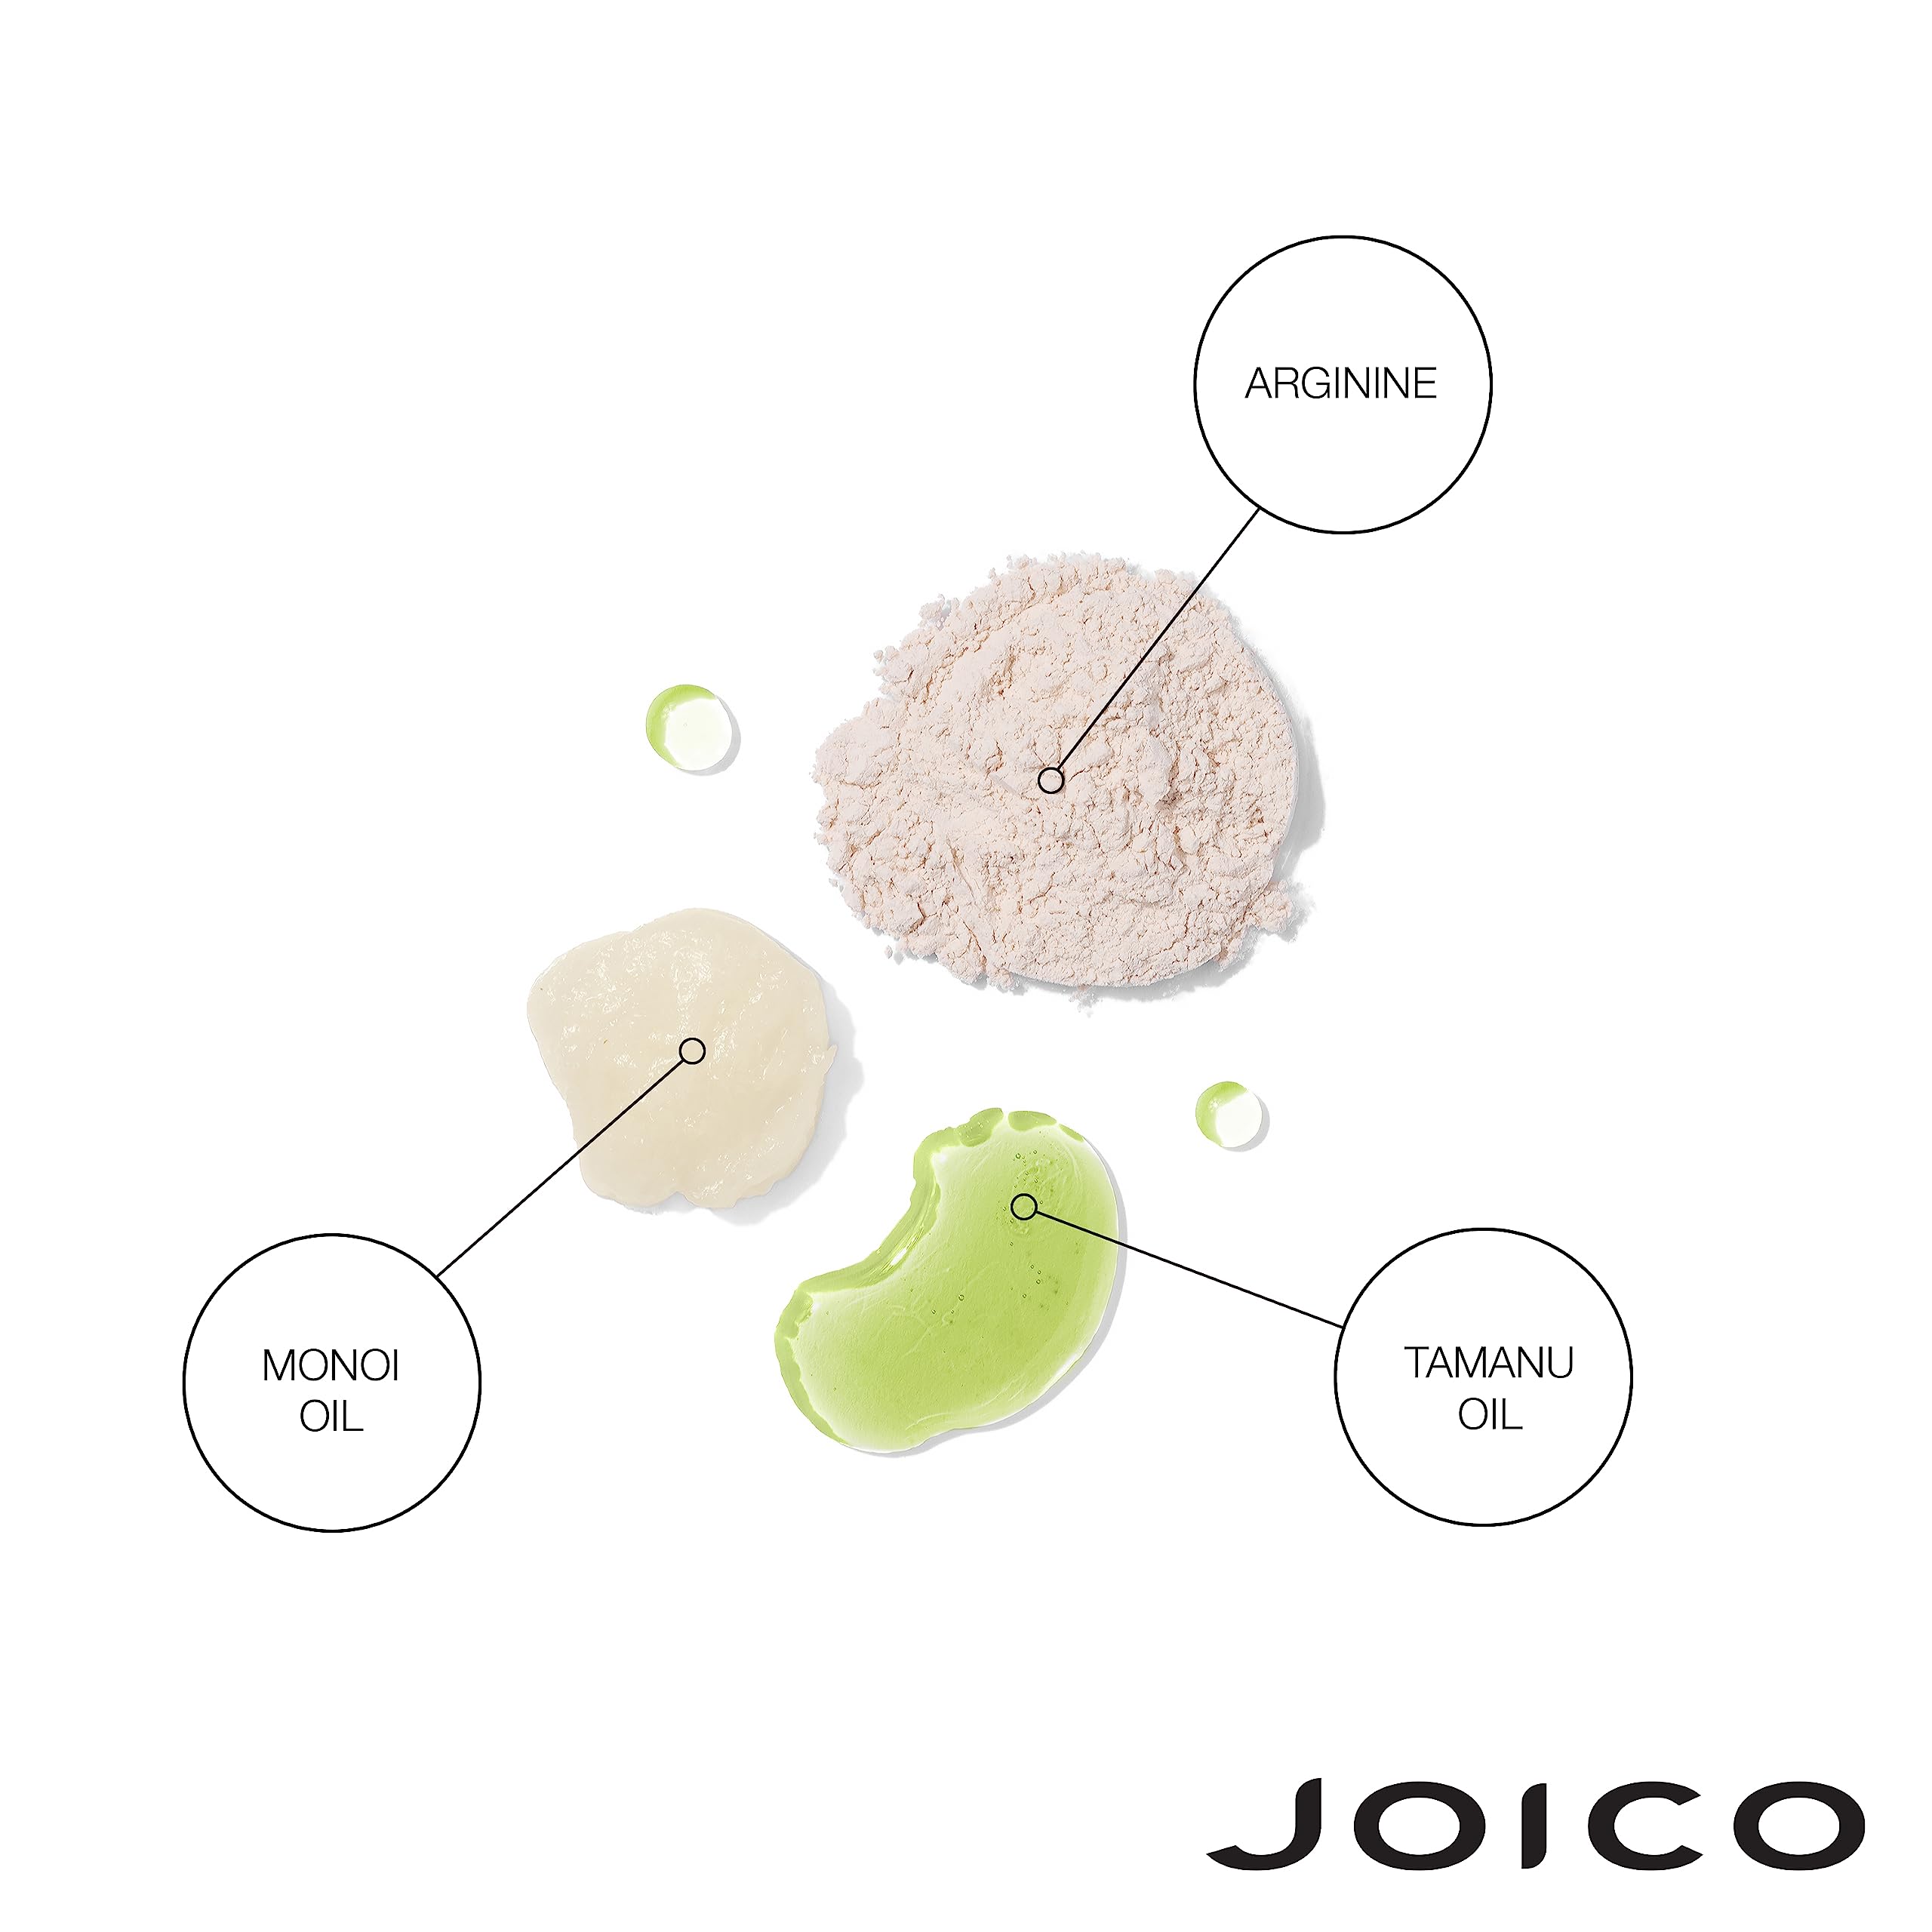 Joico Blonde Life Brightening Conditioner | For Blonde Hair | Illuminate Hydration & Softness | Add Softness & Smoothness | Sulfate Free | Fortified With Monoi & Tamanu Oil